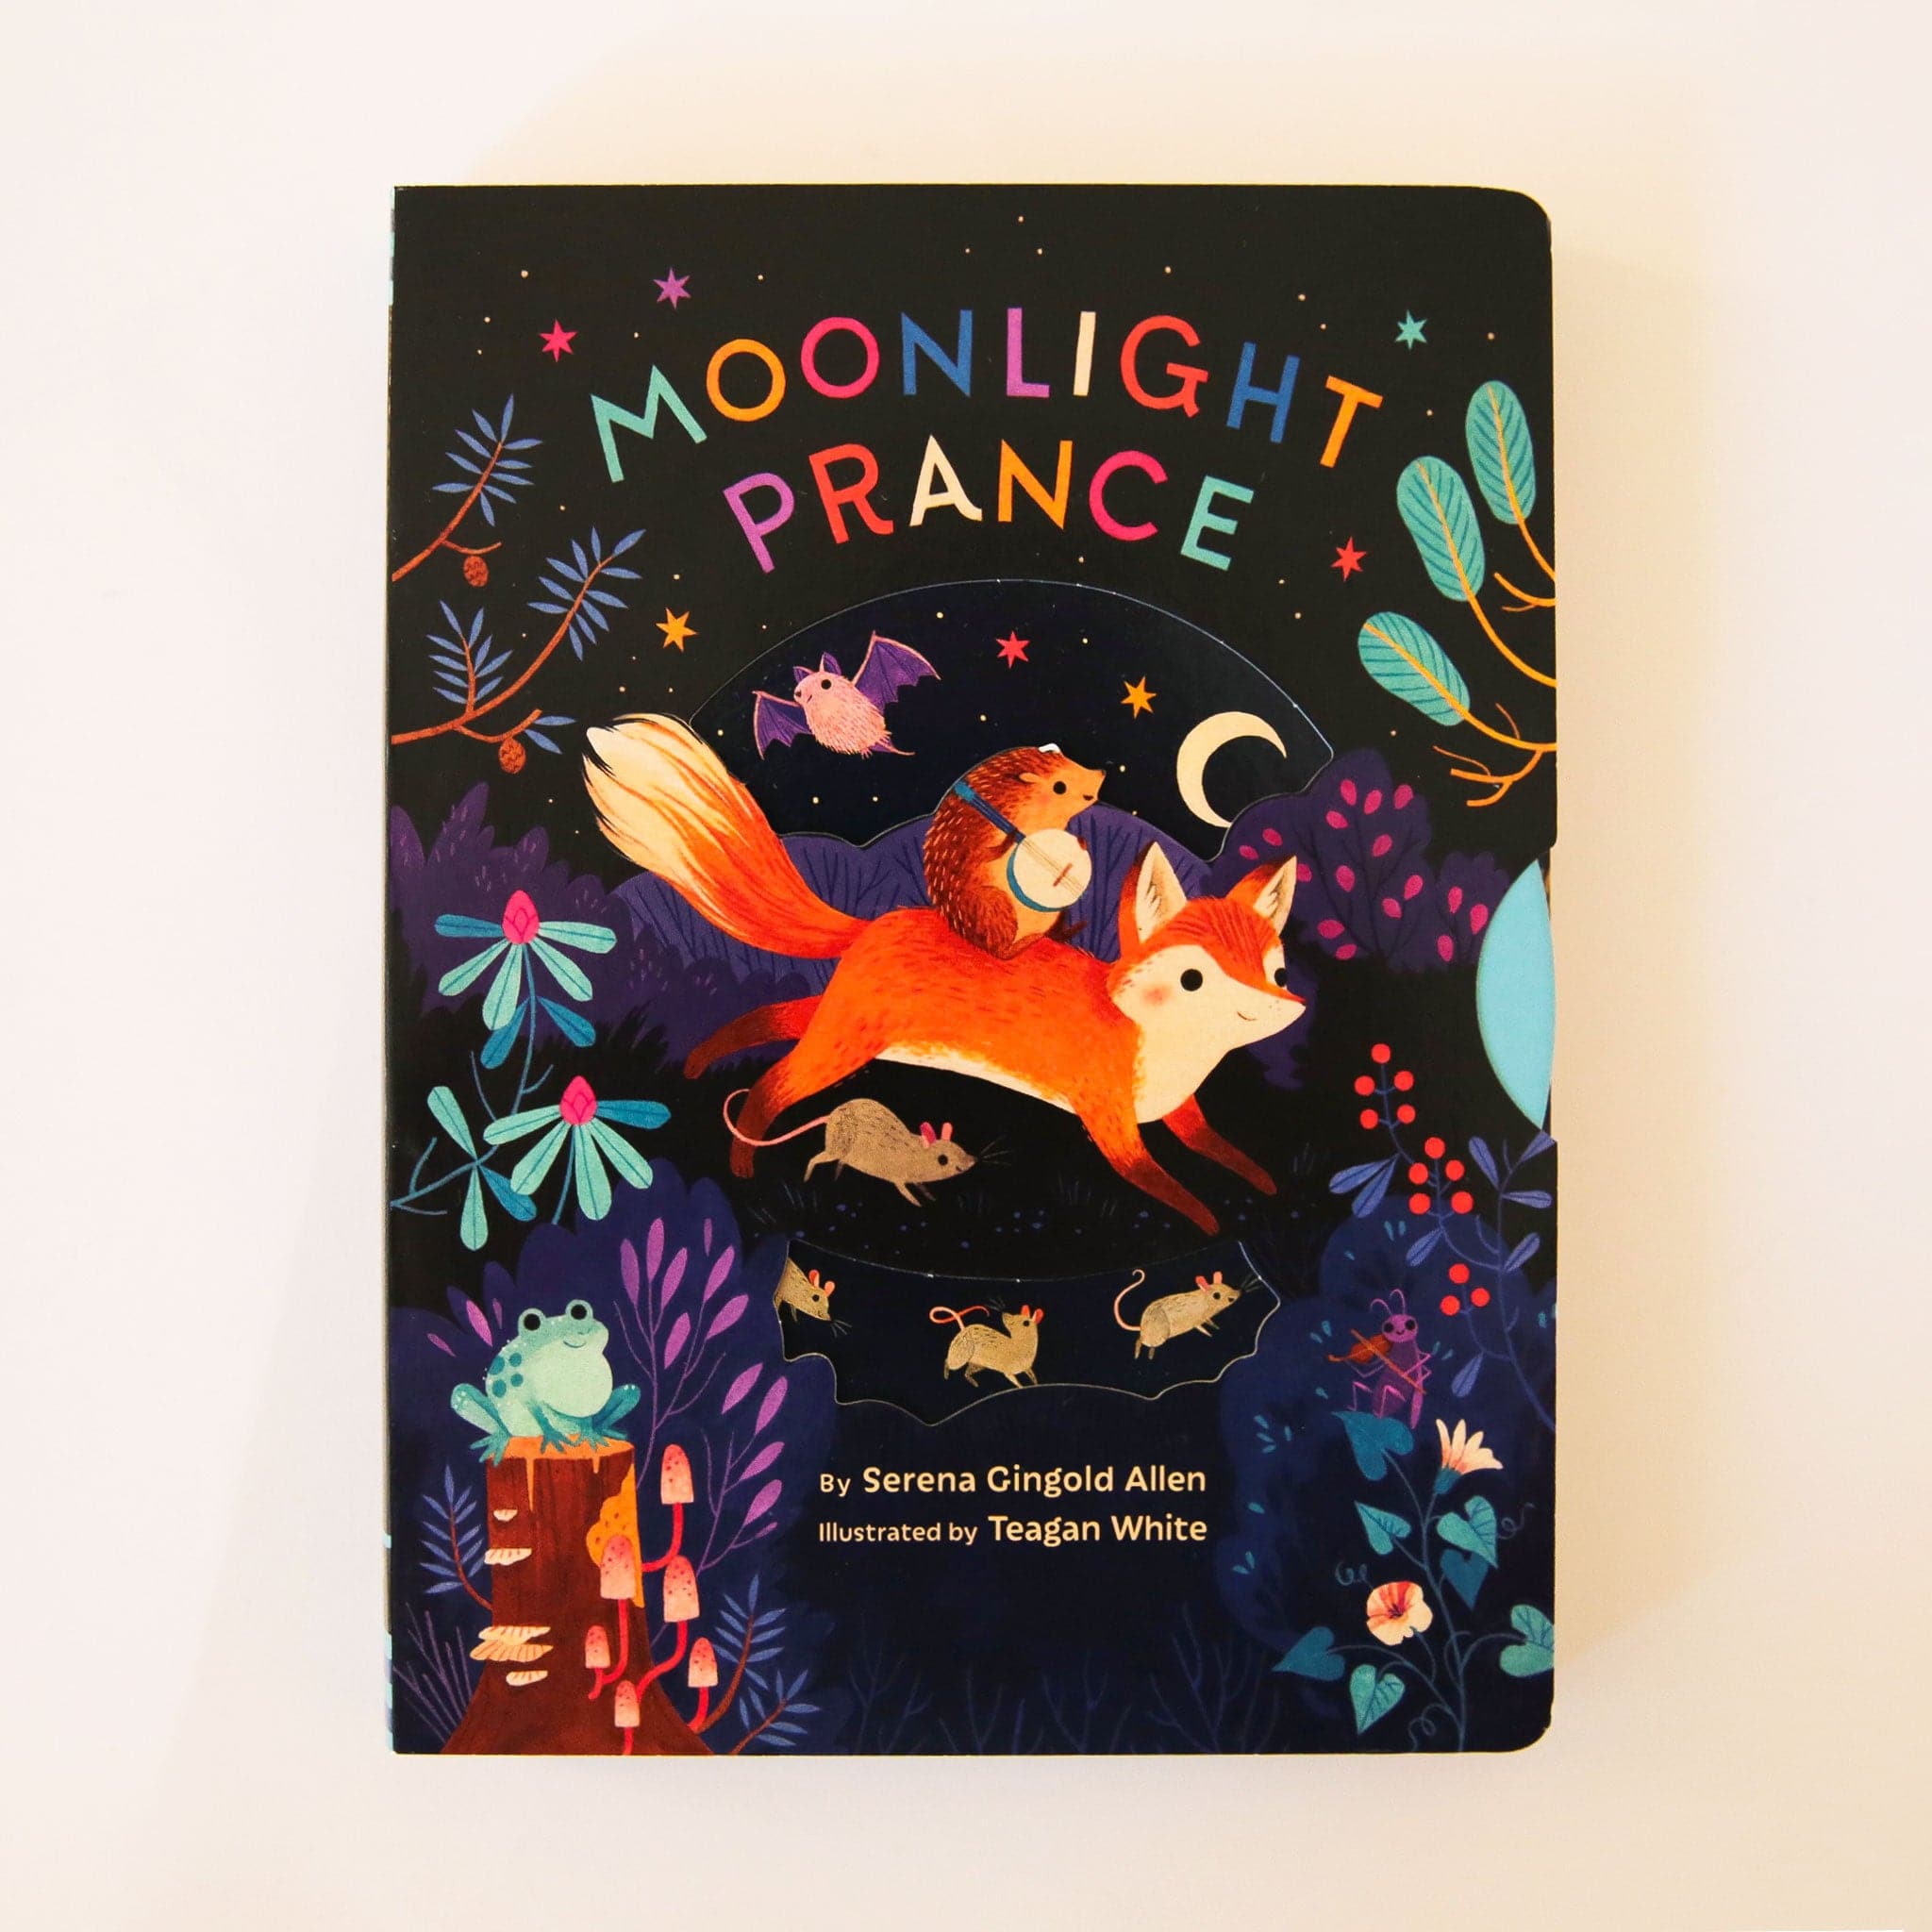 Hard cover children's book titles 'Moonlight Prance' in colorful capital lettering. Below is a woodland scene of various animals dancing around in the moonlight. Animals include a smiling fox, banjo playing hedgehog, mice and more. The background of the cover is solid black and accented with colorful star detailing. 